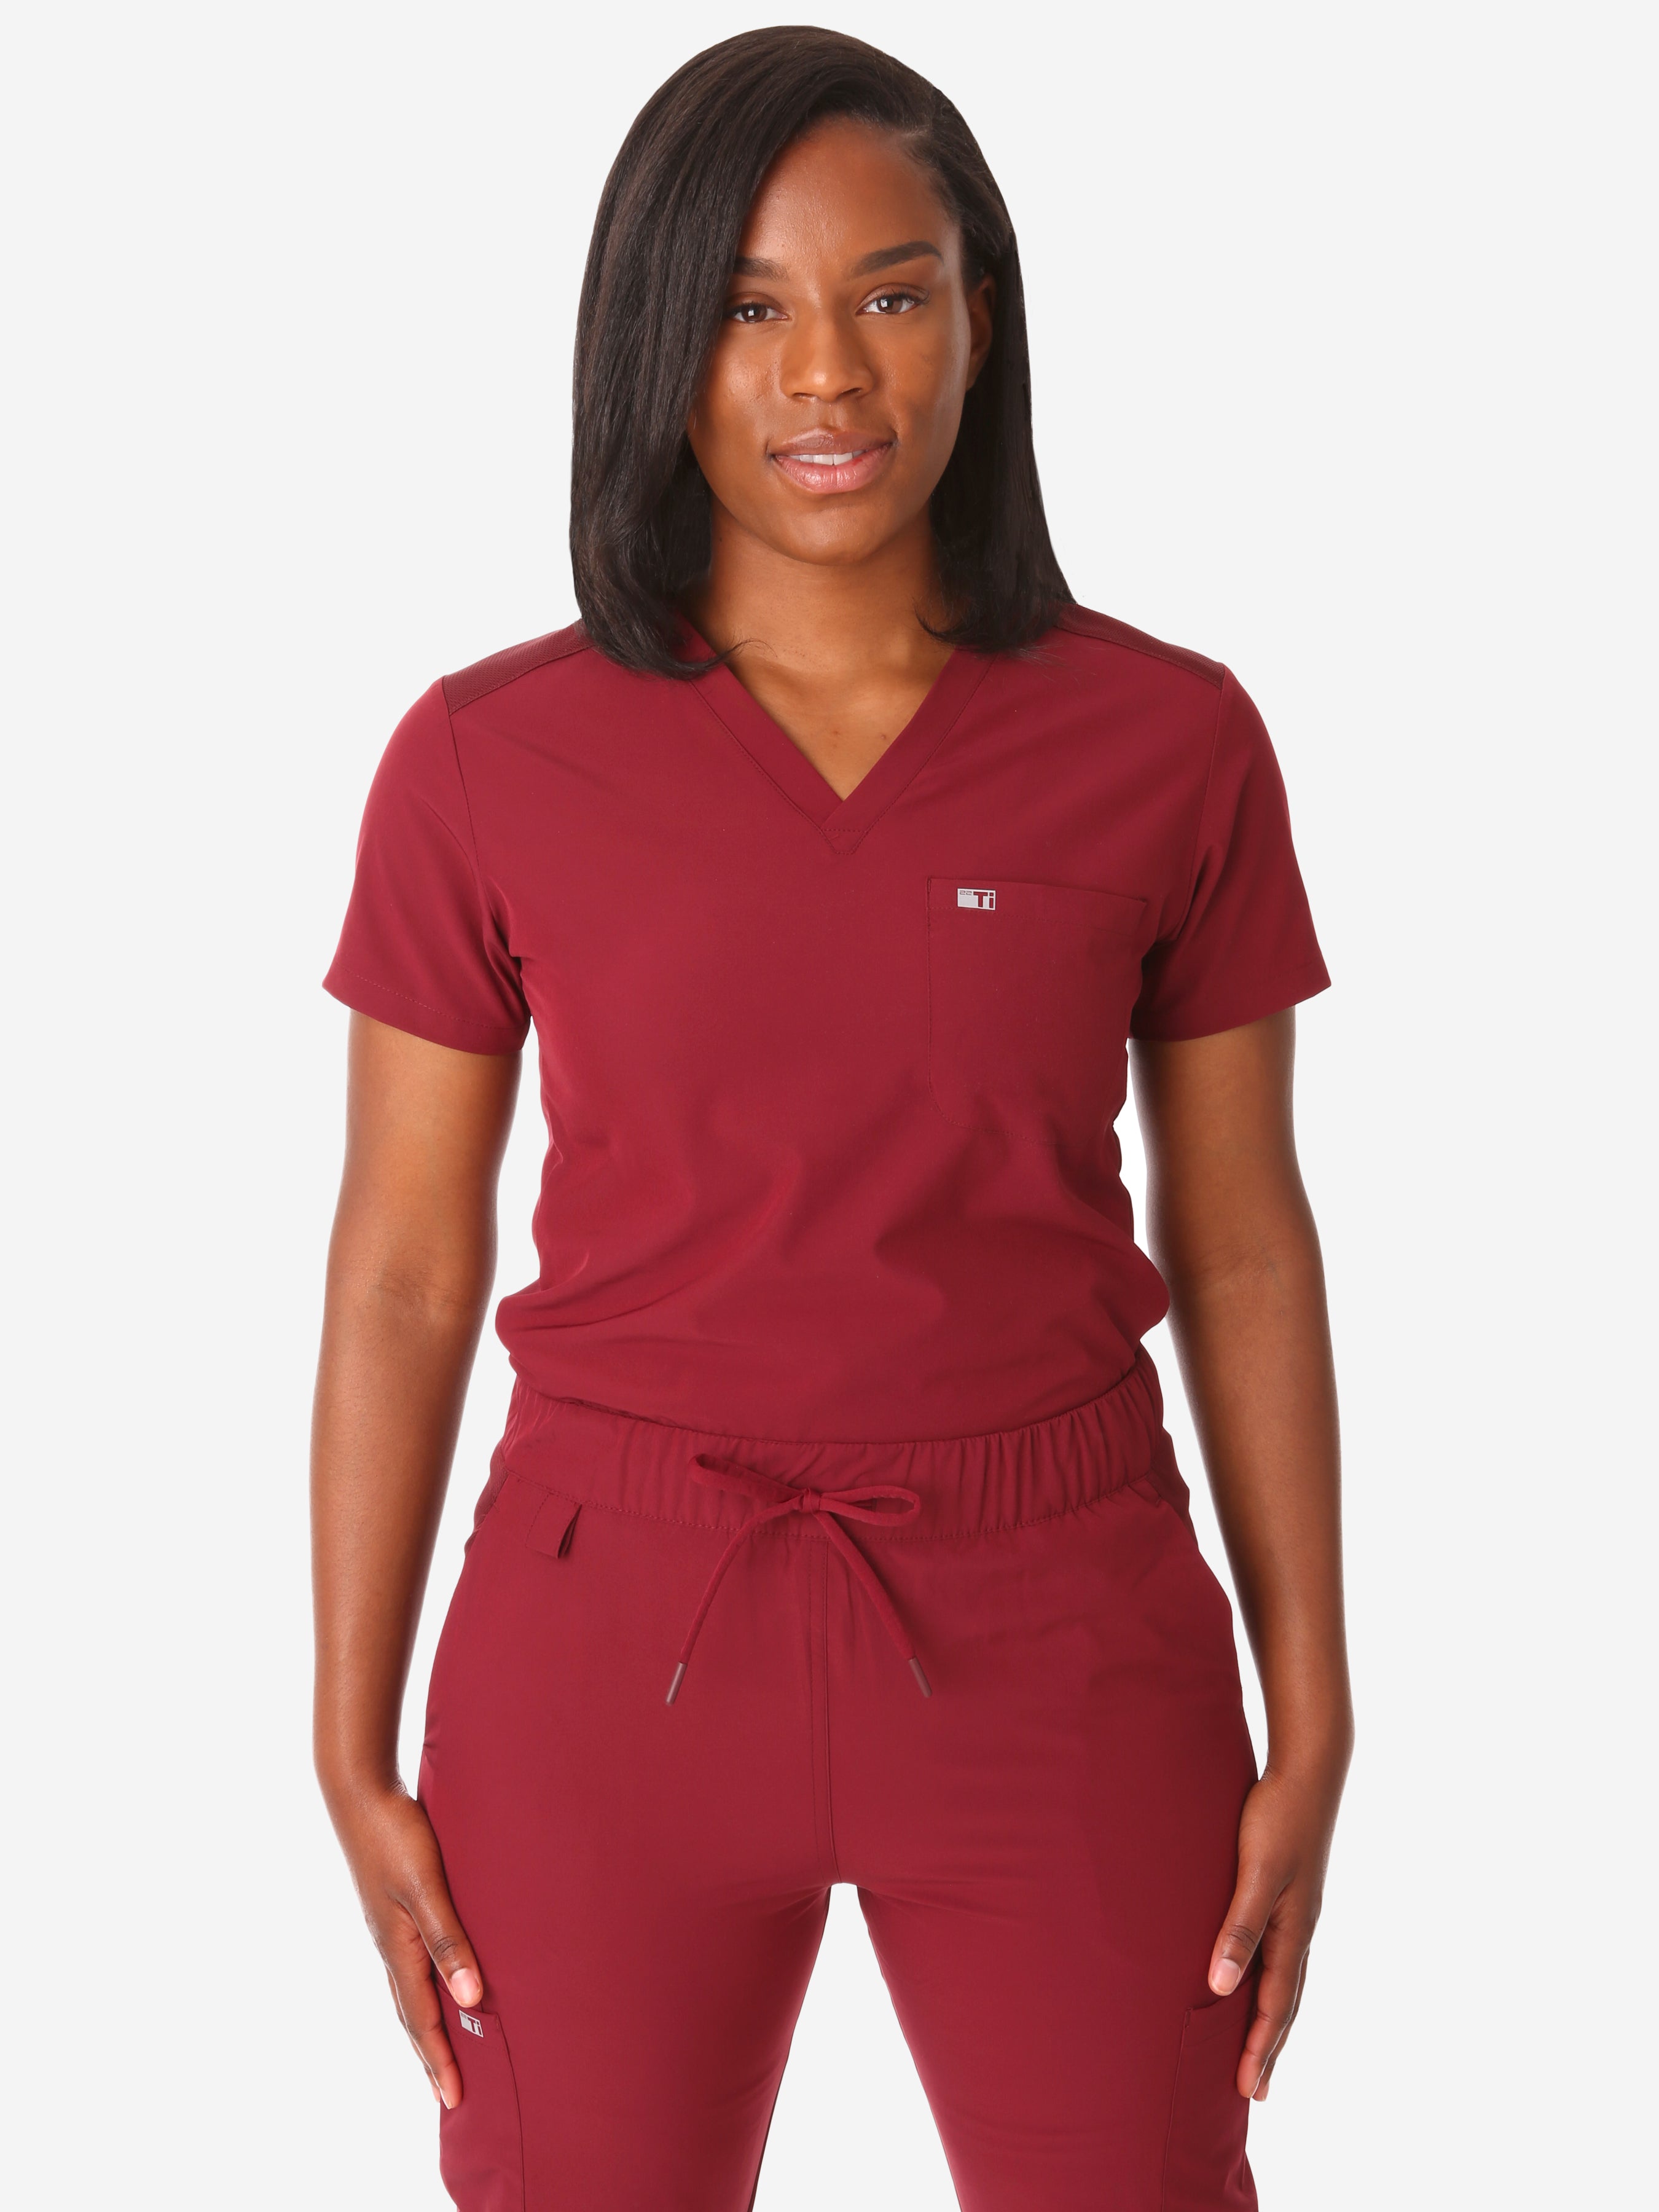 Scrubs for Women  The Best (And Cutest) Scrubs For Medical